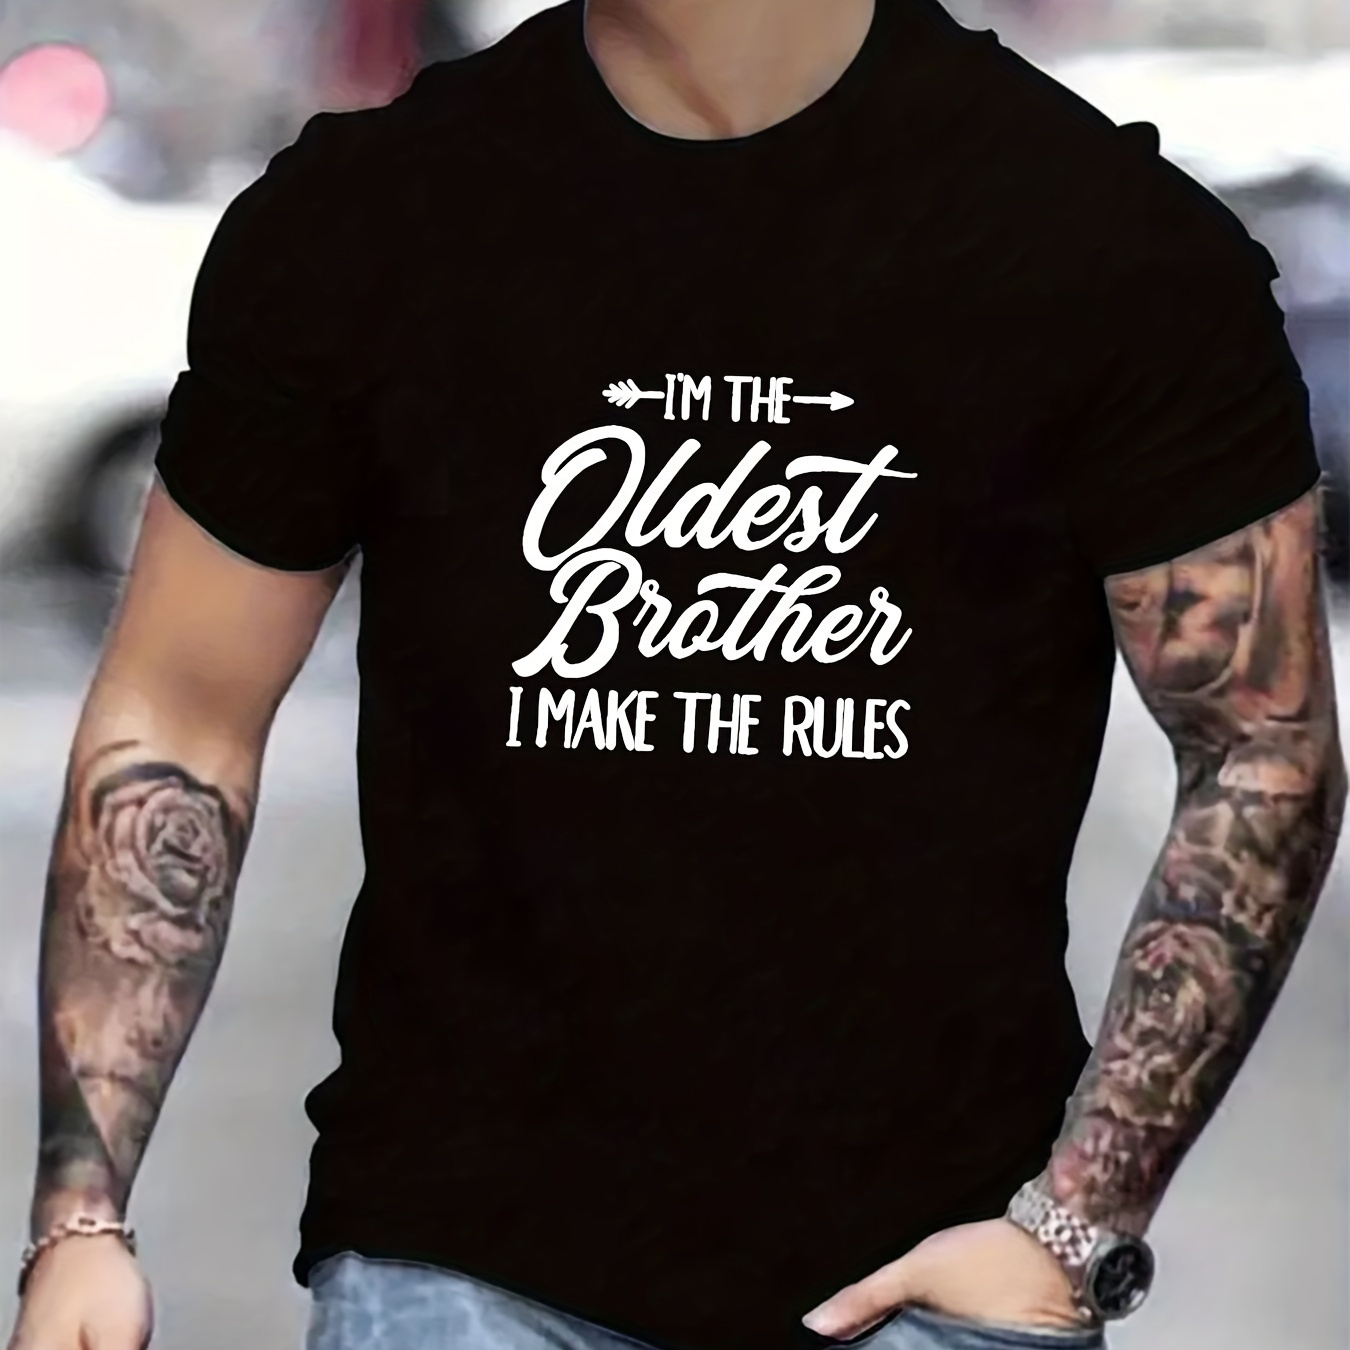 

The Oldest Brother Print T Shirt, Tees For Men, Casual Short Sleeve T-shirt For Summer